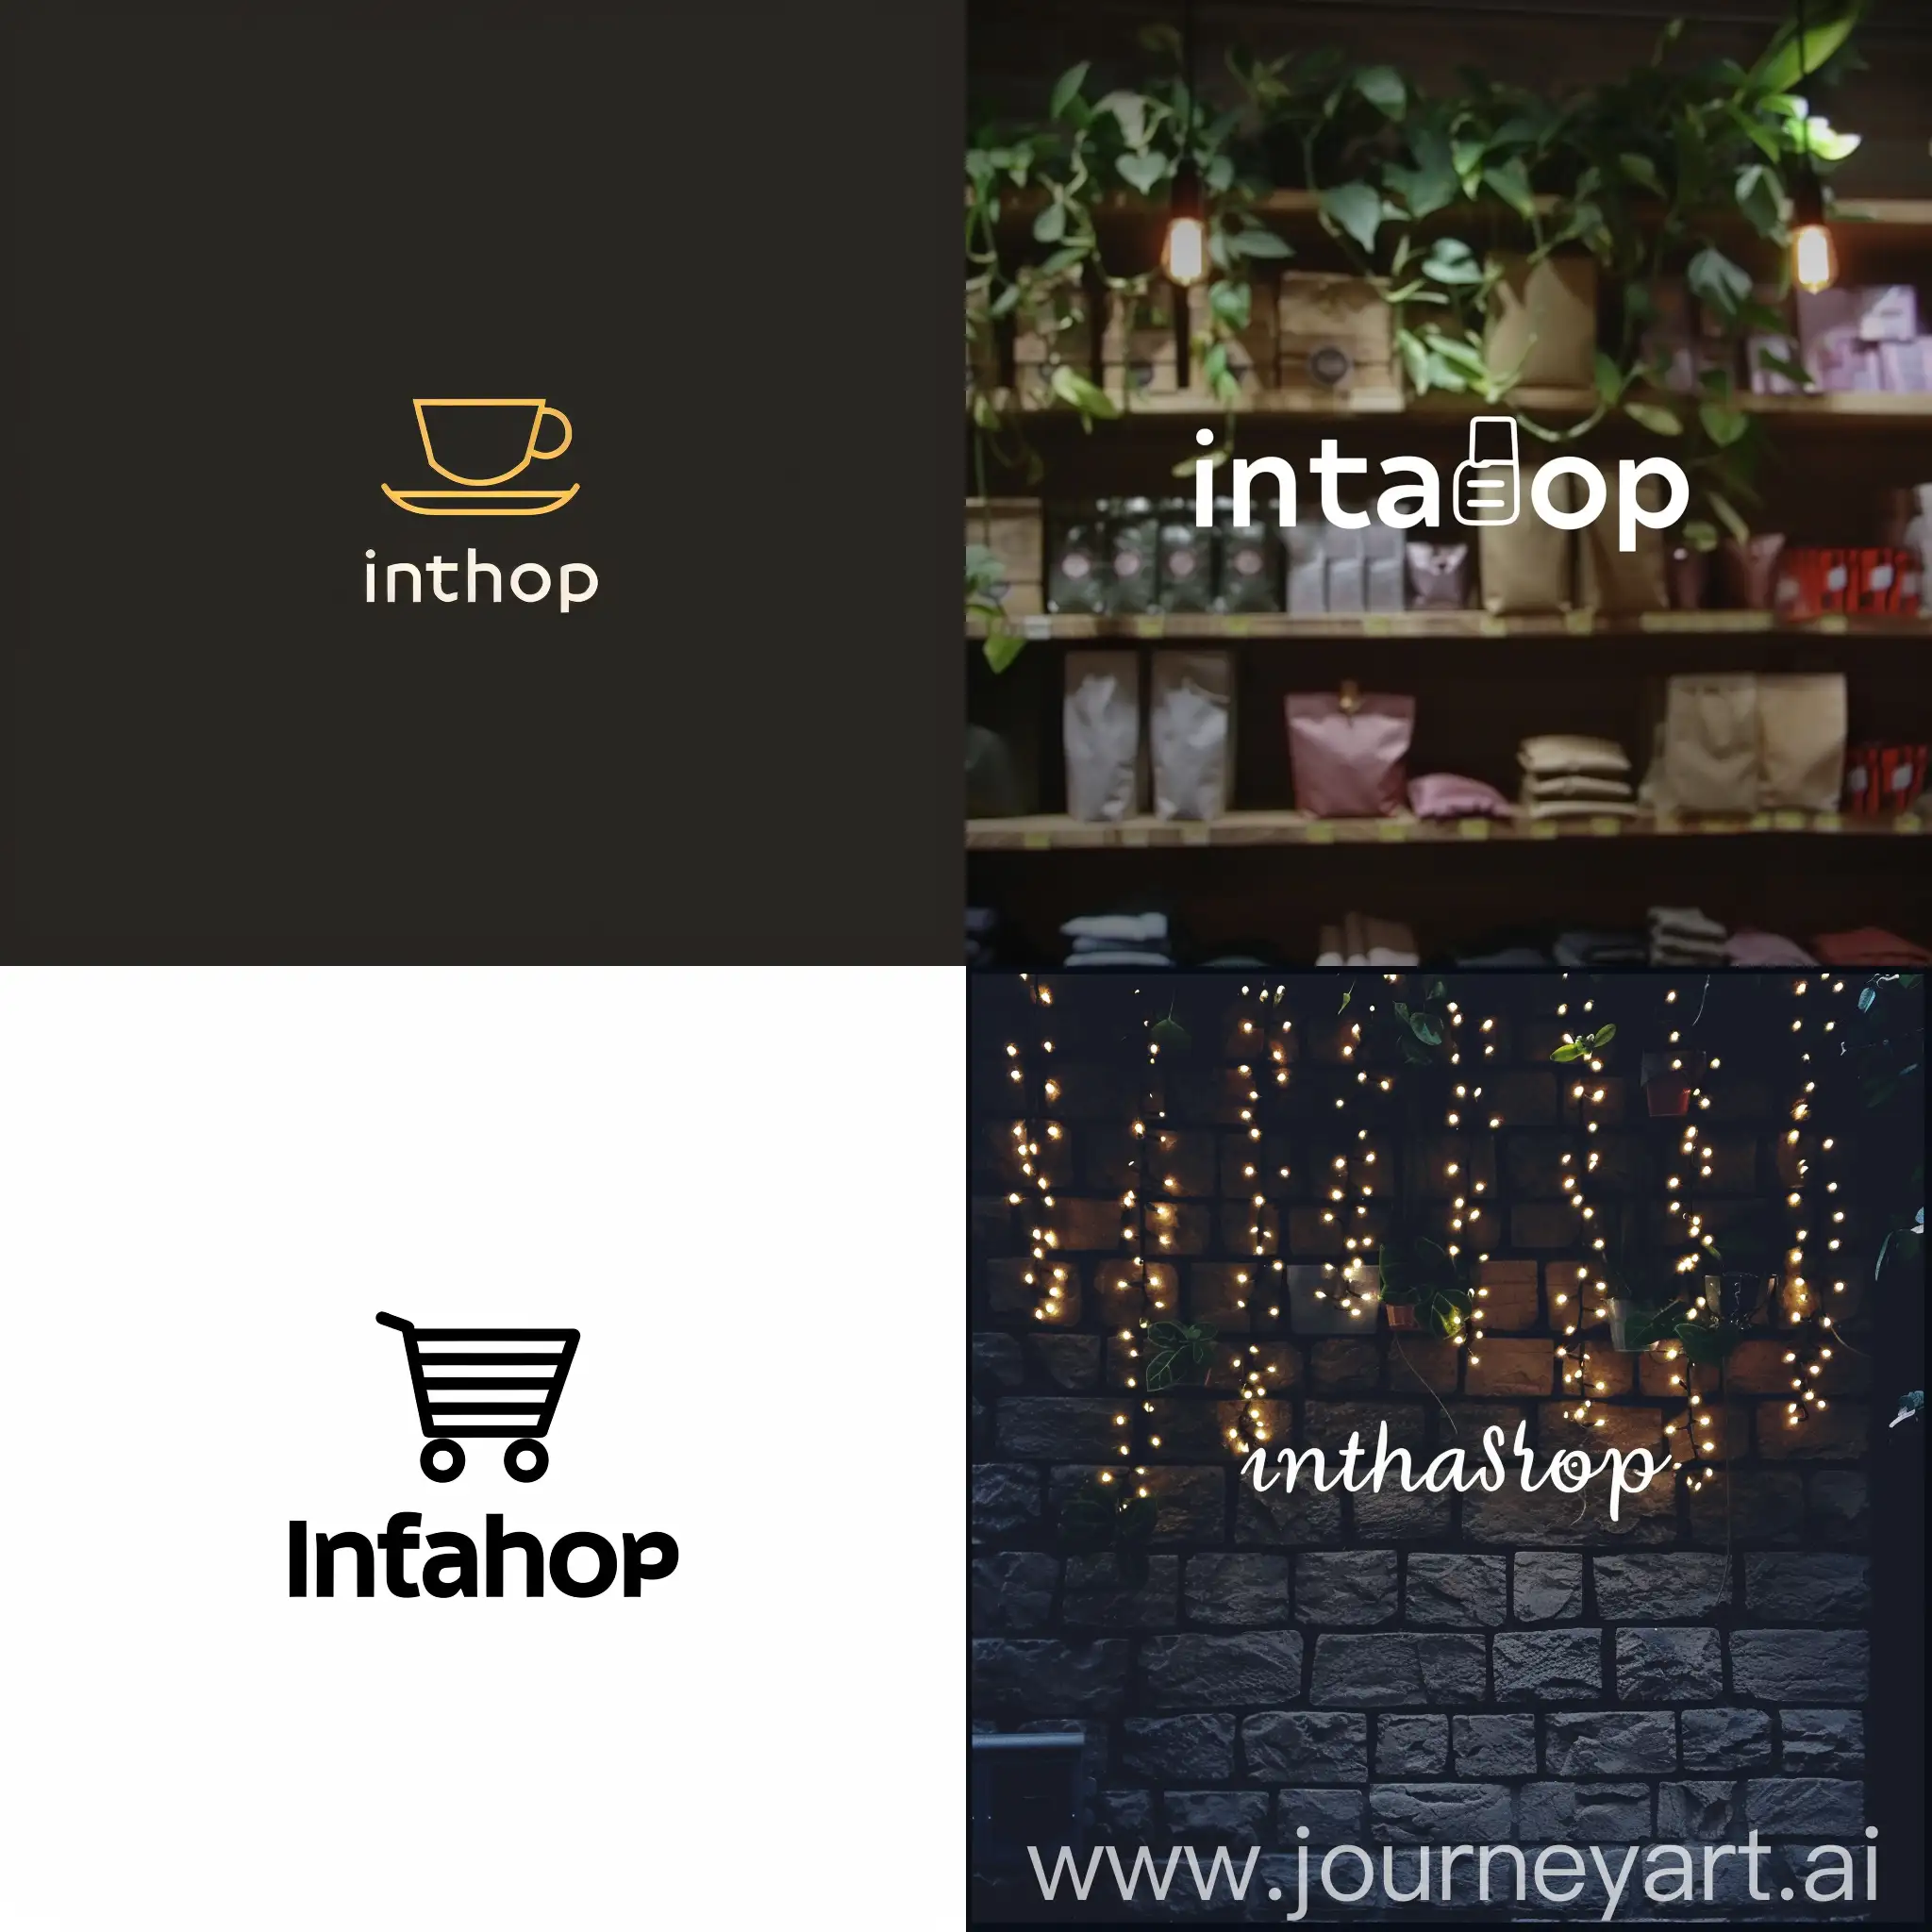 i am making a ecommerce website for a project . make me a simple but aesthetic logo with name InstaShop for it